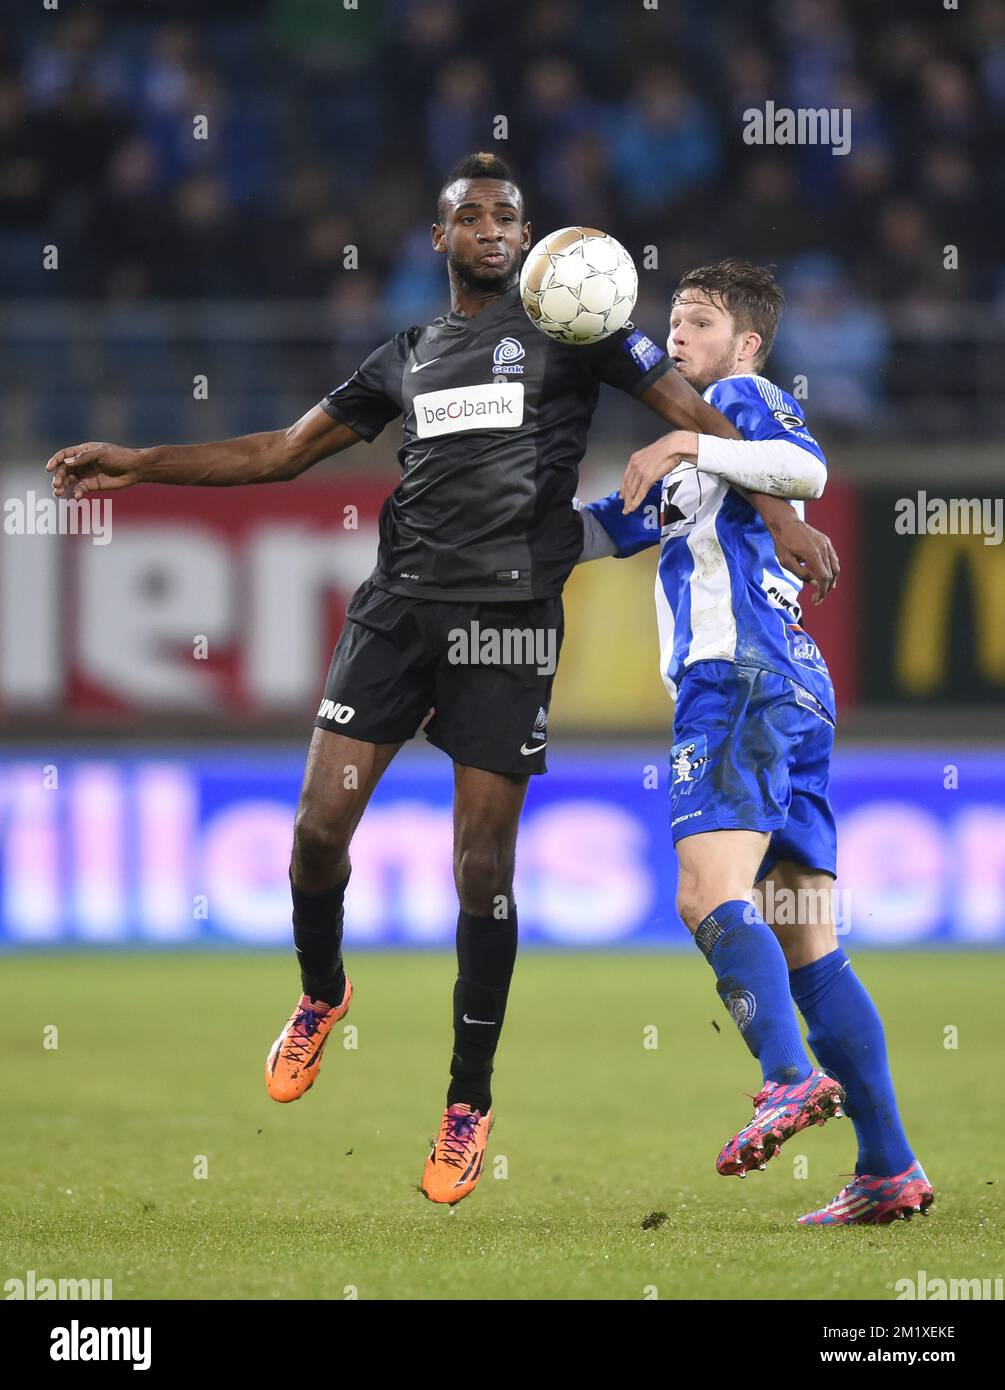 20141207 - GENT, BELGIUM: Genk's Petit-Pele Ilombe Mboyo and Gent's Thomas Foket fight for the ball during the Jupiler Pro League match between KAA Gent and KRC Genk, in Gent, Sunday 07 December 2014, on day 18 of the Belgian soccer championship. BELGA PHOTO JOHN THYS Stock Photo